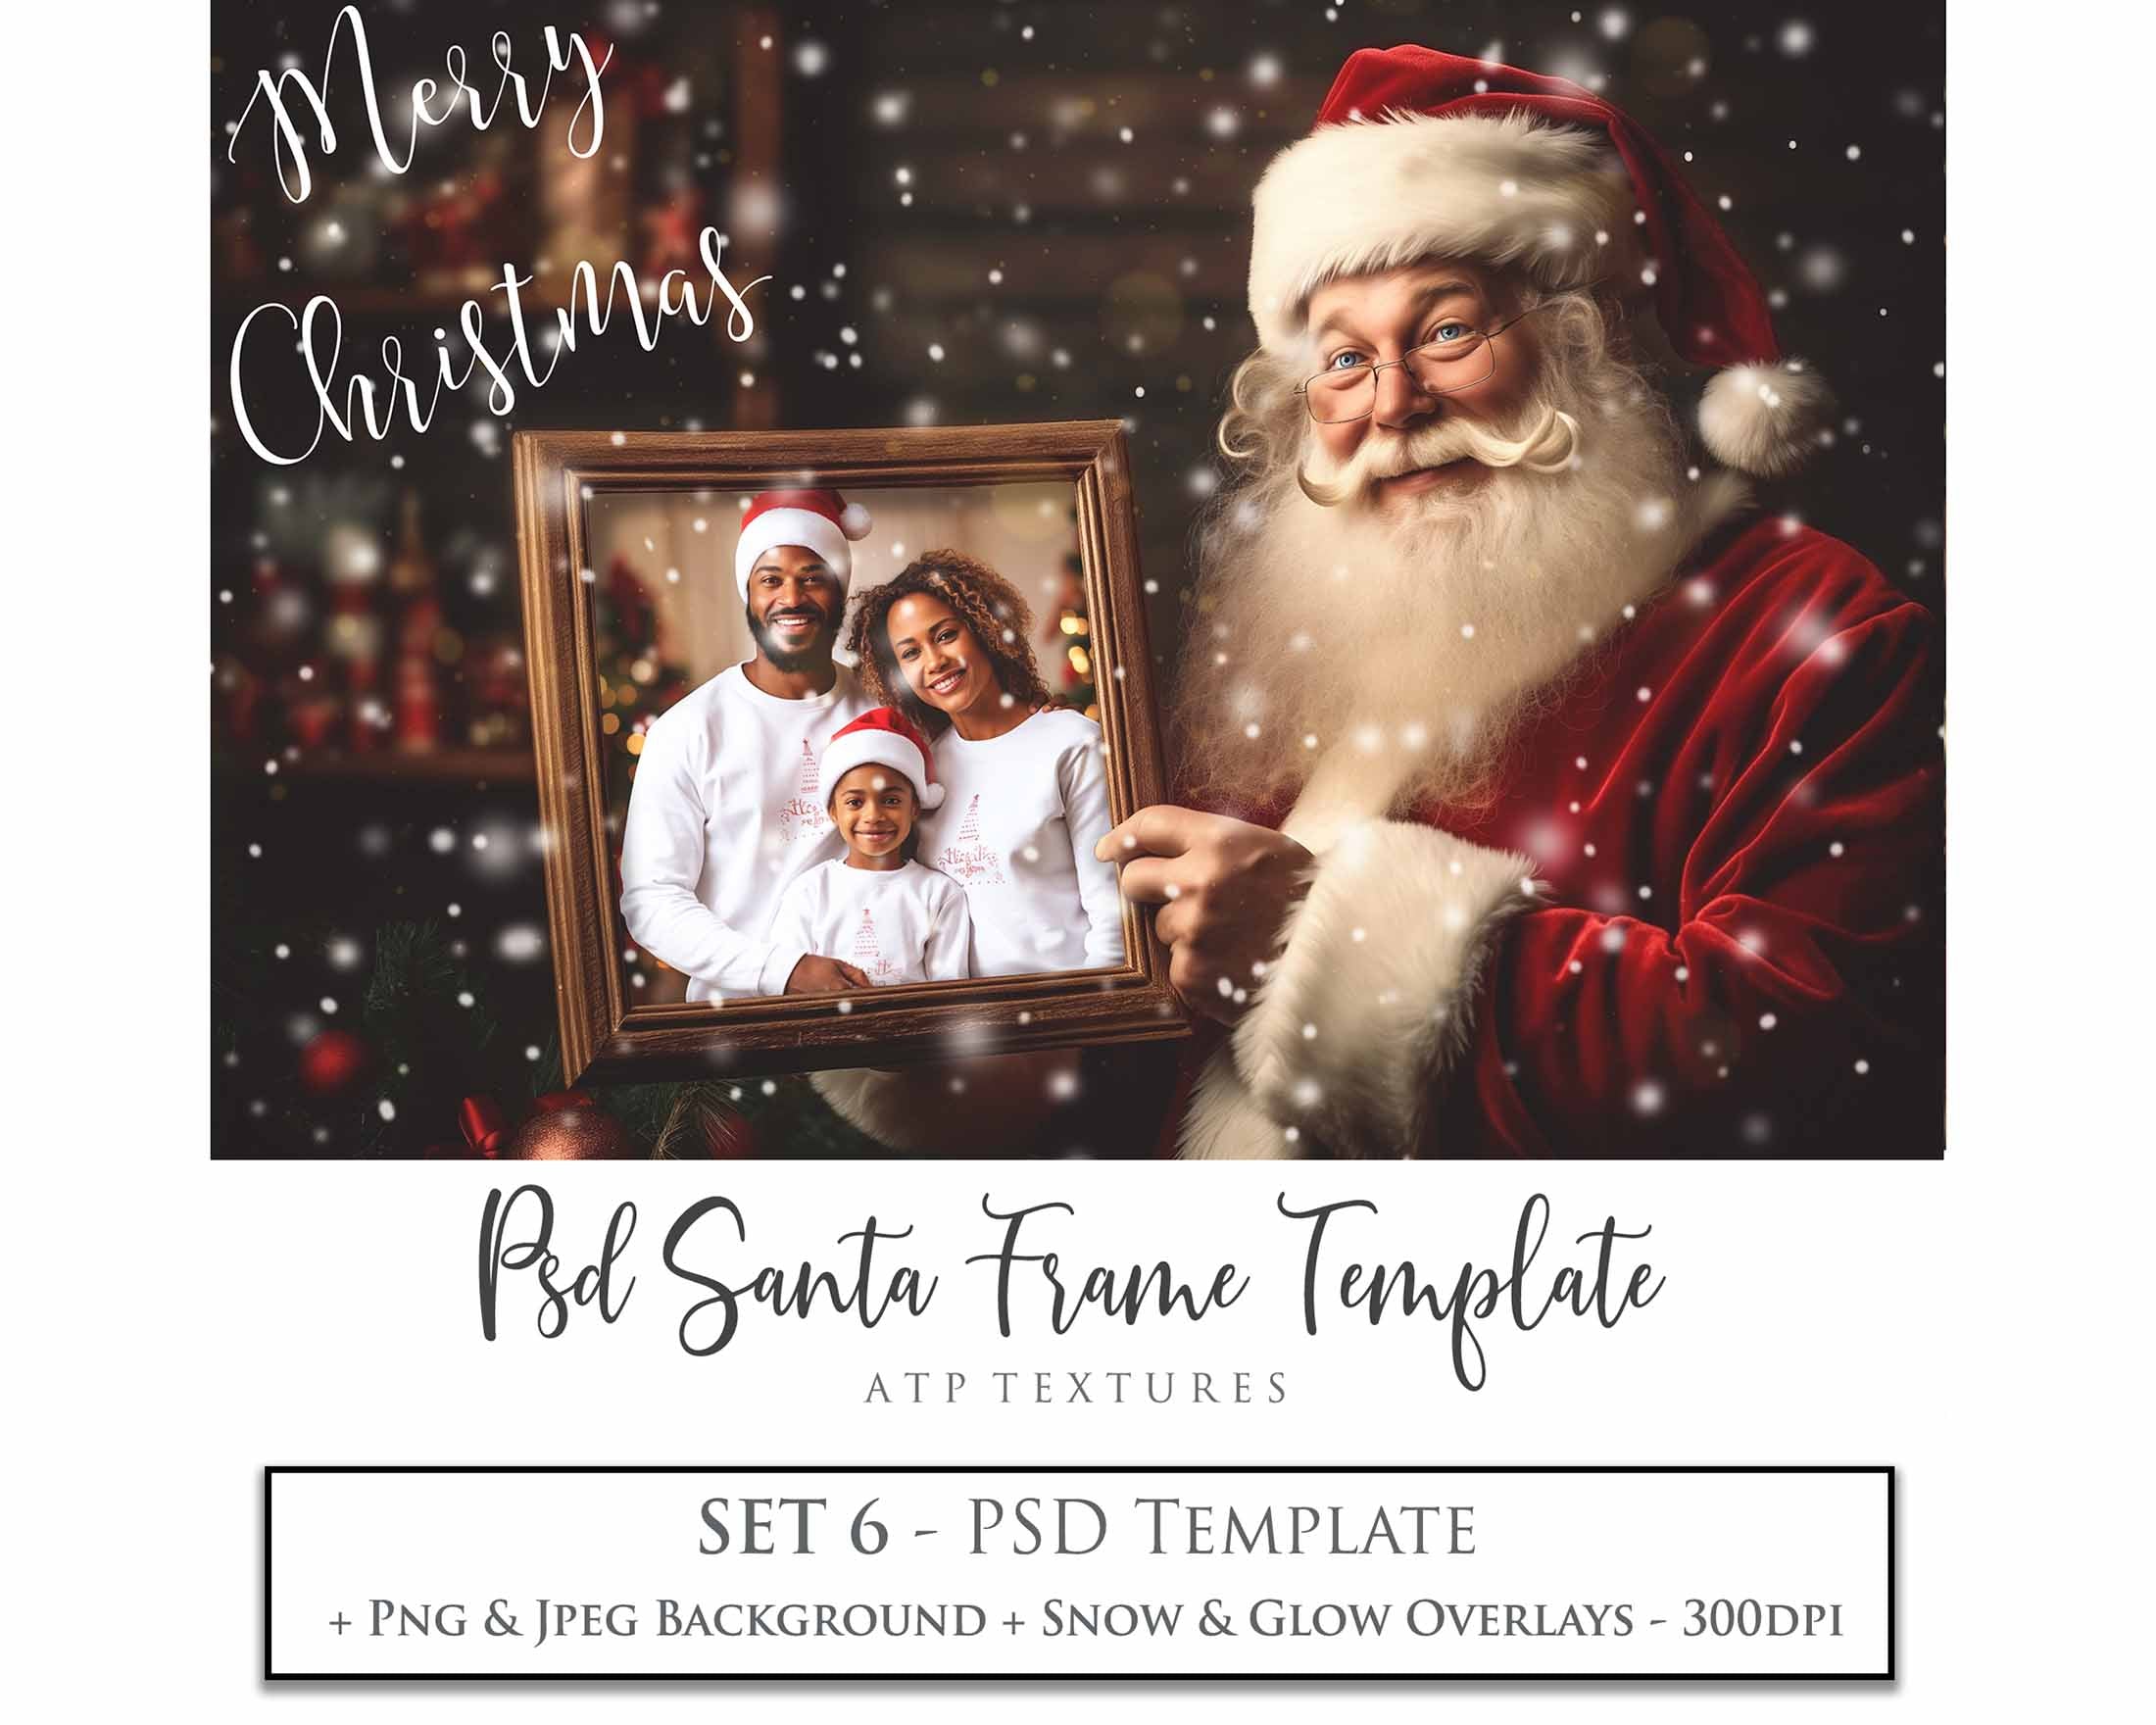 Digital Santa with Frame Background.  Png snow and glow overlays & PSD Template. The frame is transparent, perfect for adding your own images.  The file is 6000 x 4000, 300dpi. Png Included. Use for Christmas edits, Photography, Card Crafts, Scrapbooking. Xmas Backdrops. Santa holding a frame.